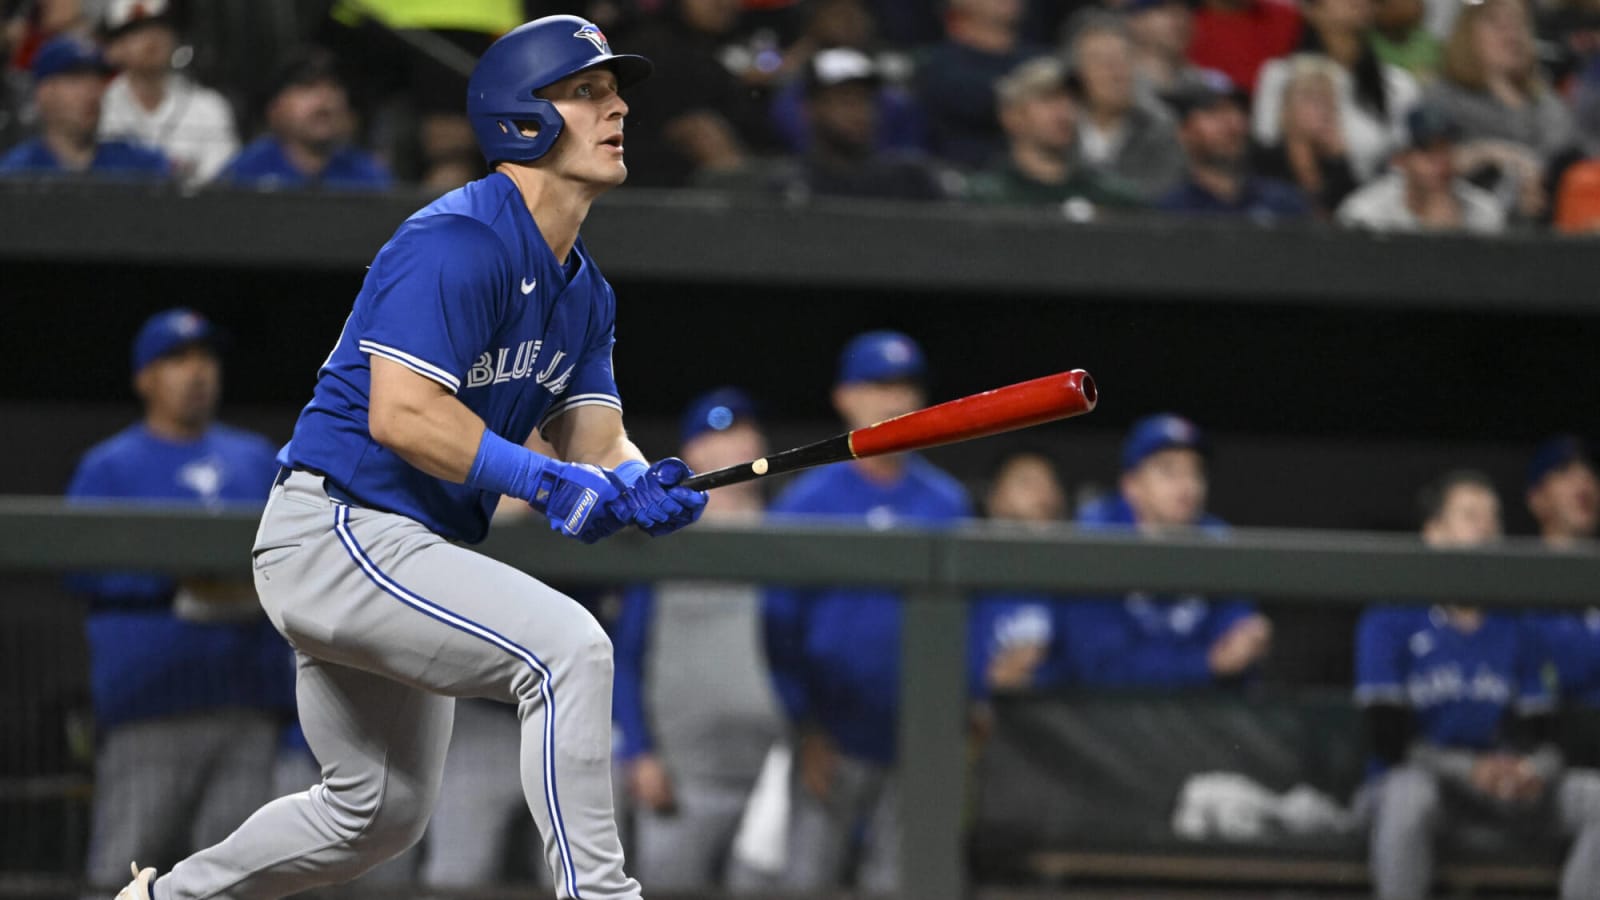 Instant Reaction: Daulton Varsho hit his seventh home run of the season as the Blue Jays defeated the Orioles in extra innings